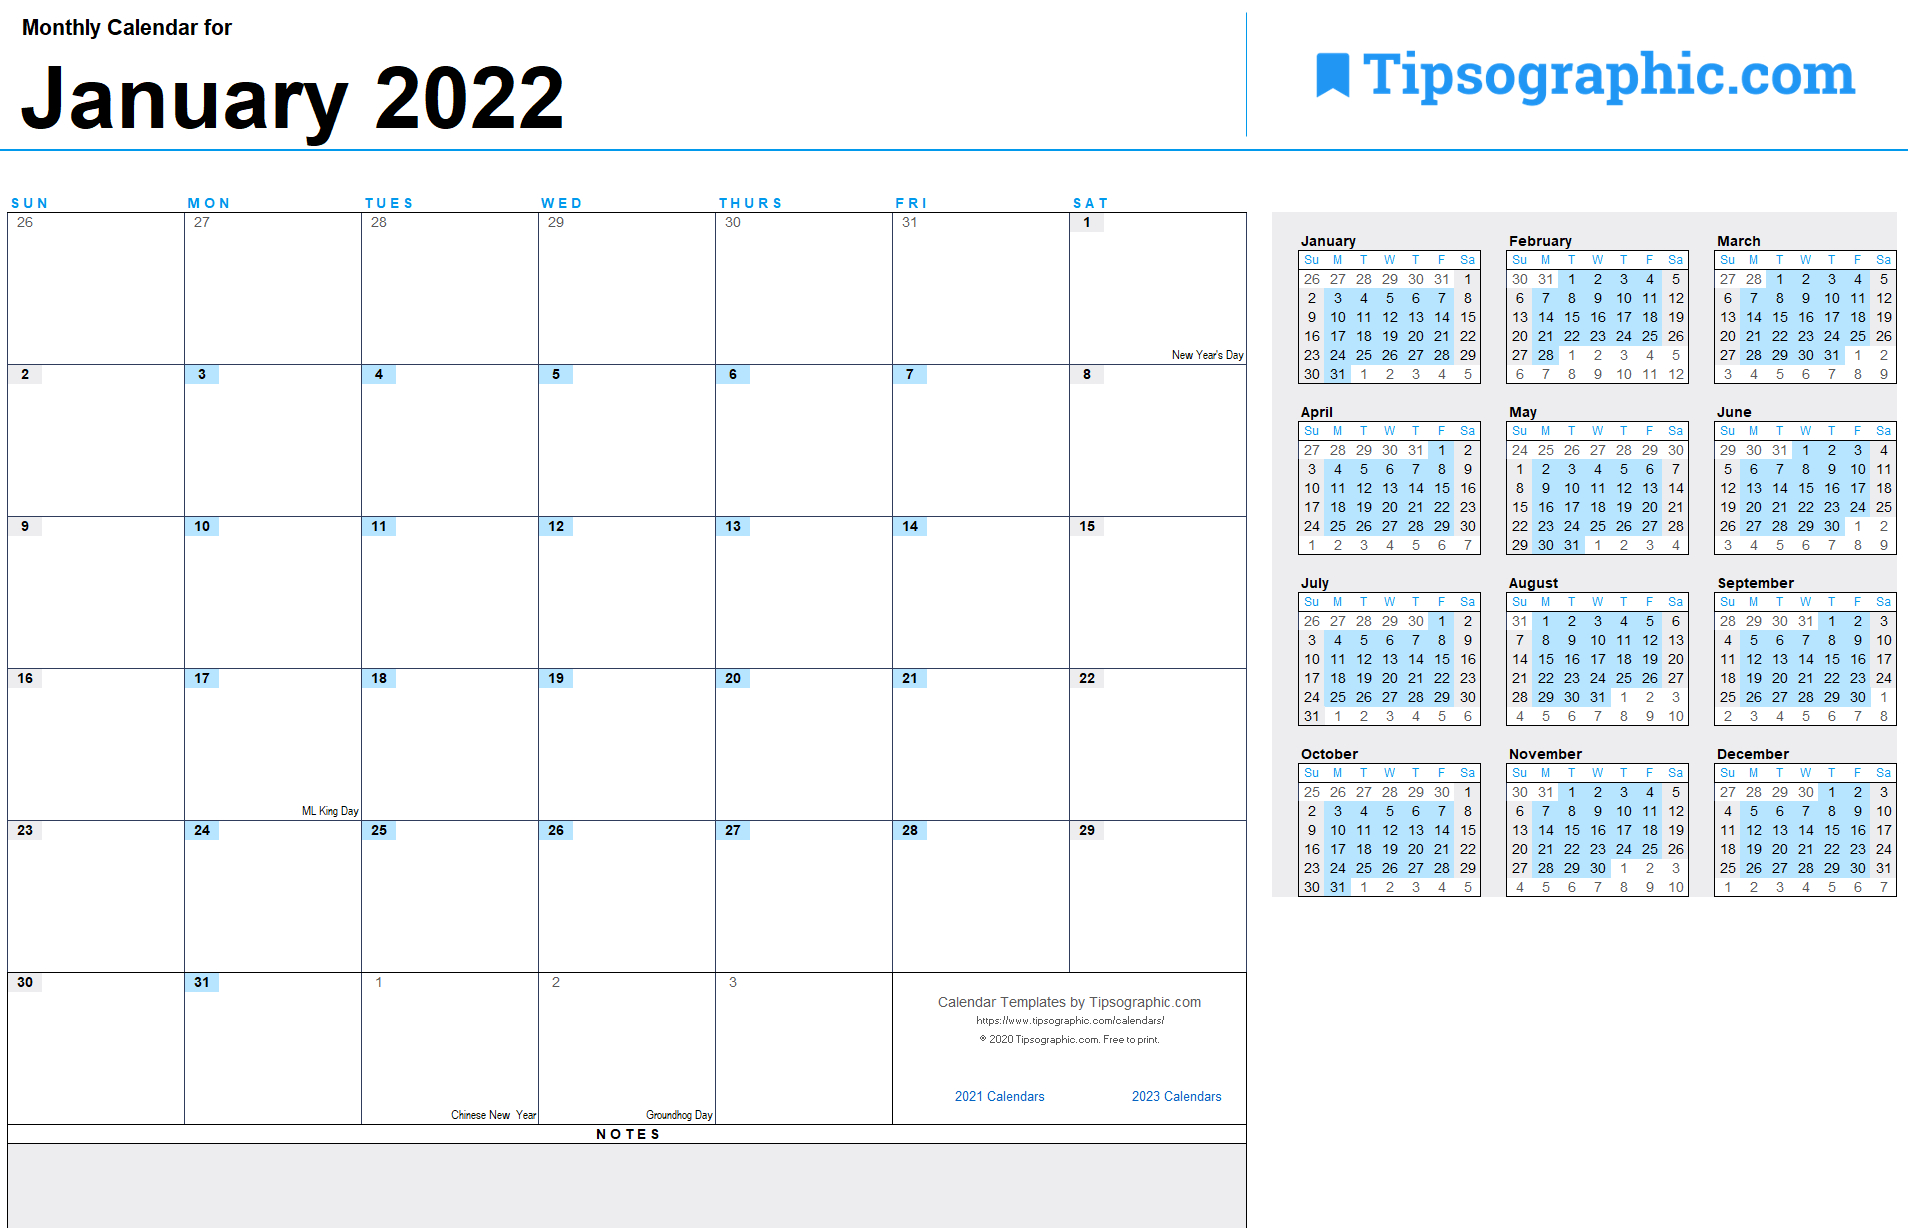 2022 Calendar Templates &amp; Images | Tipsographic